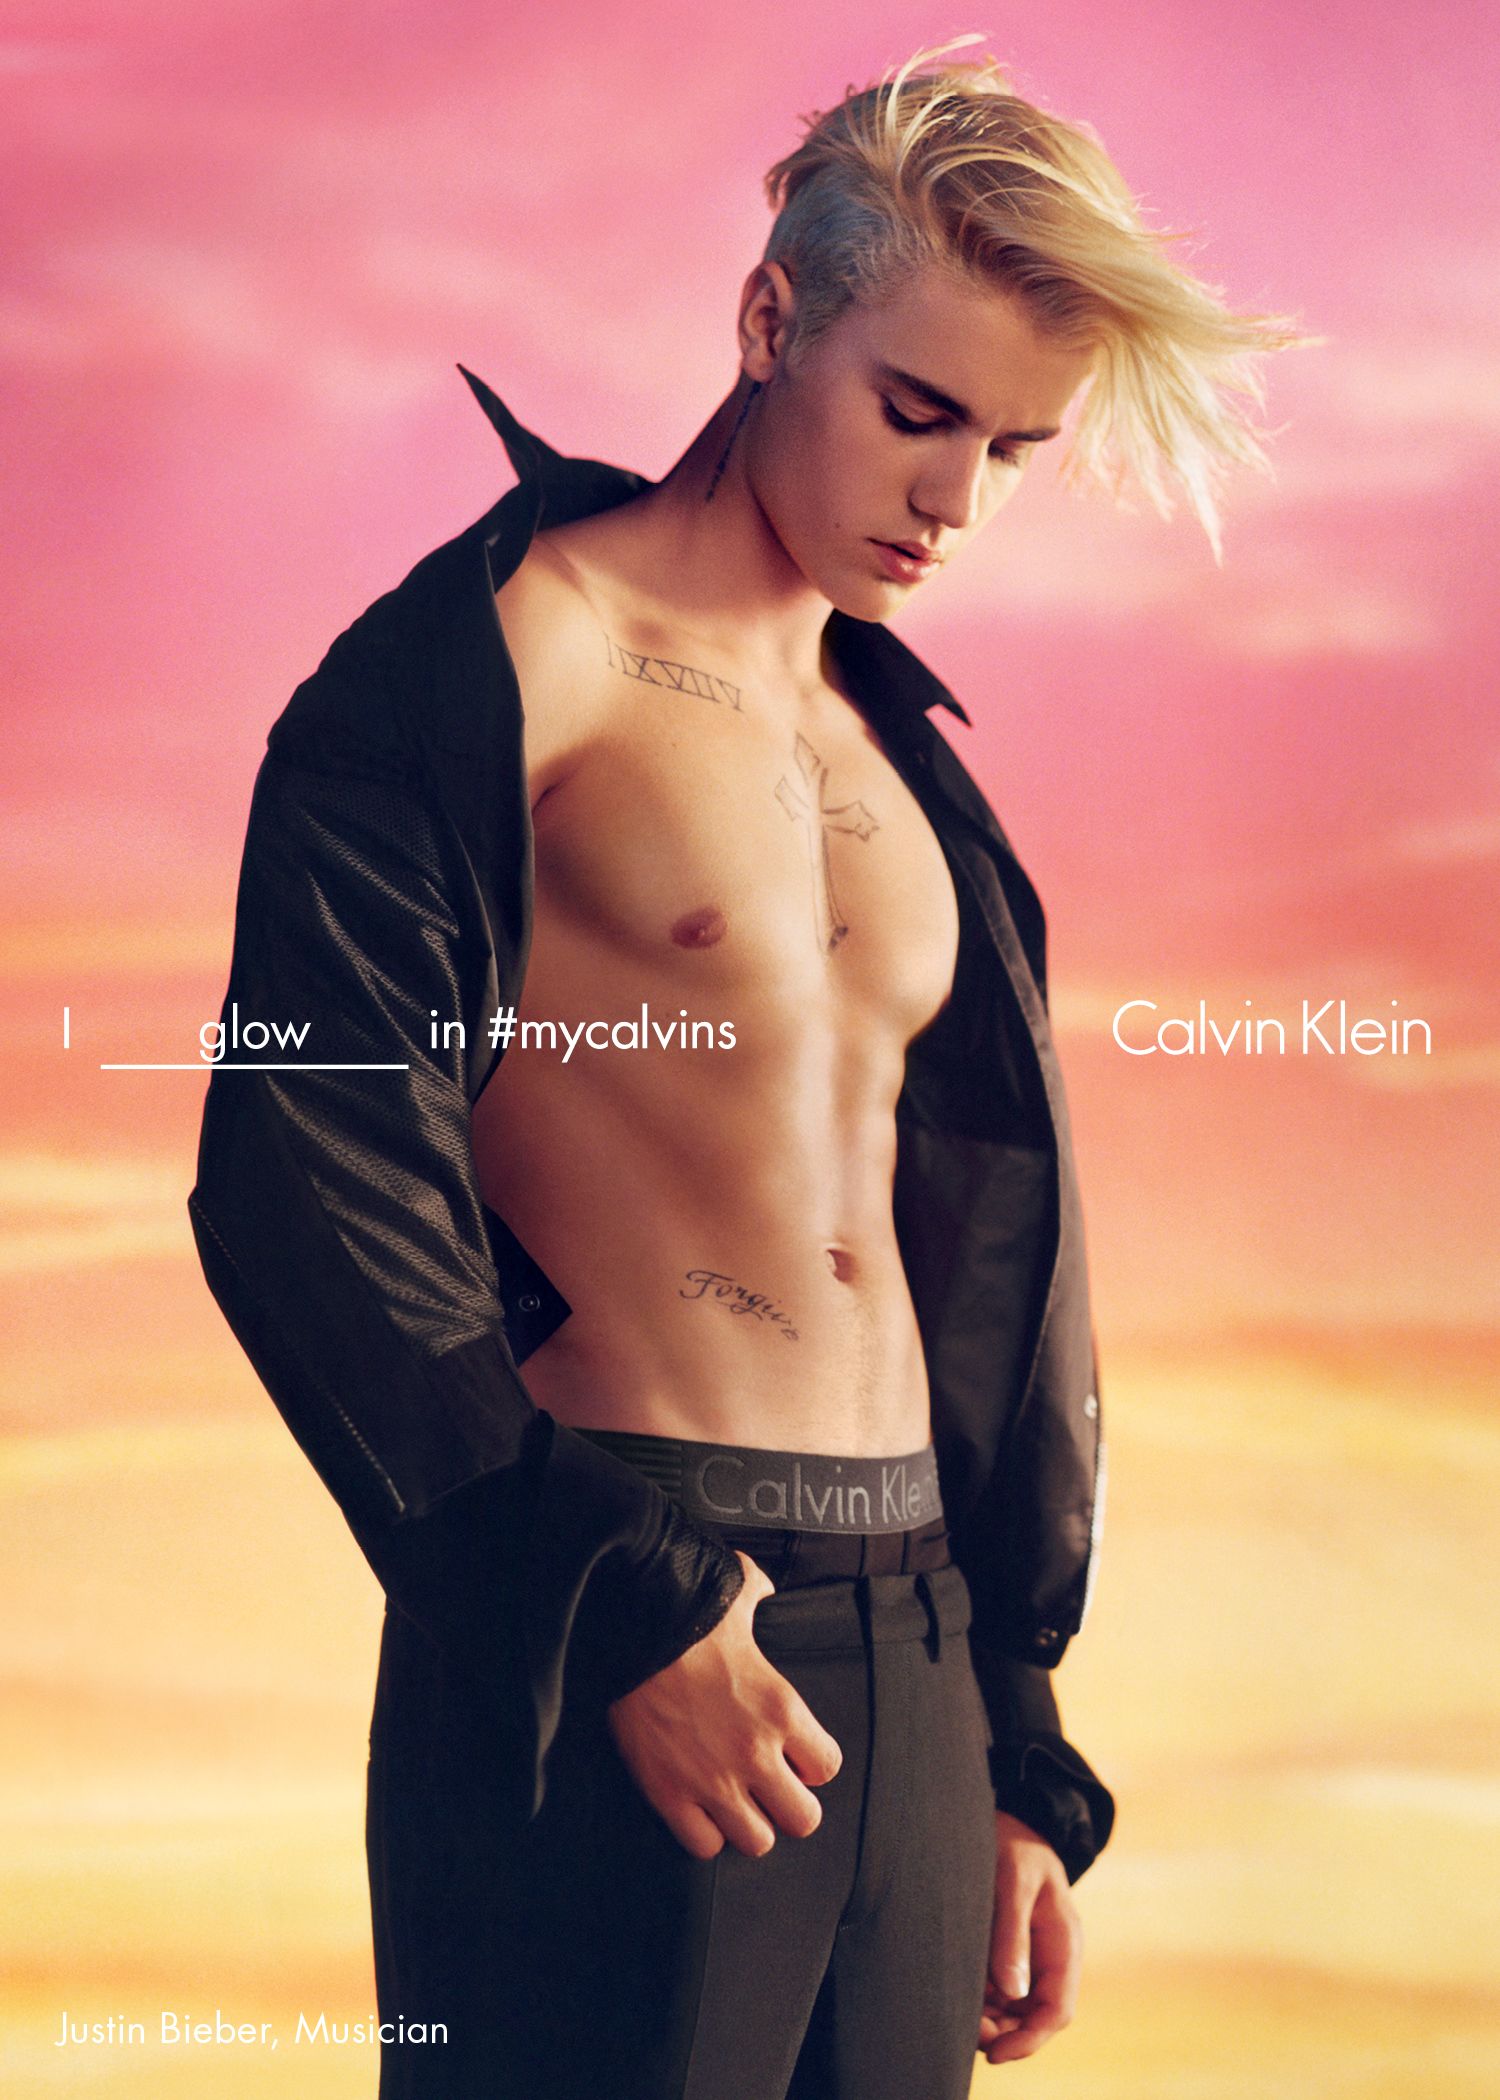 Calvin Klein on why sex still sells … and the power of Justin Bieber